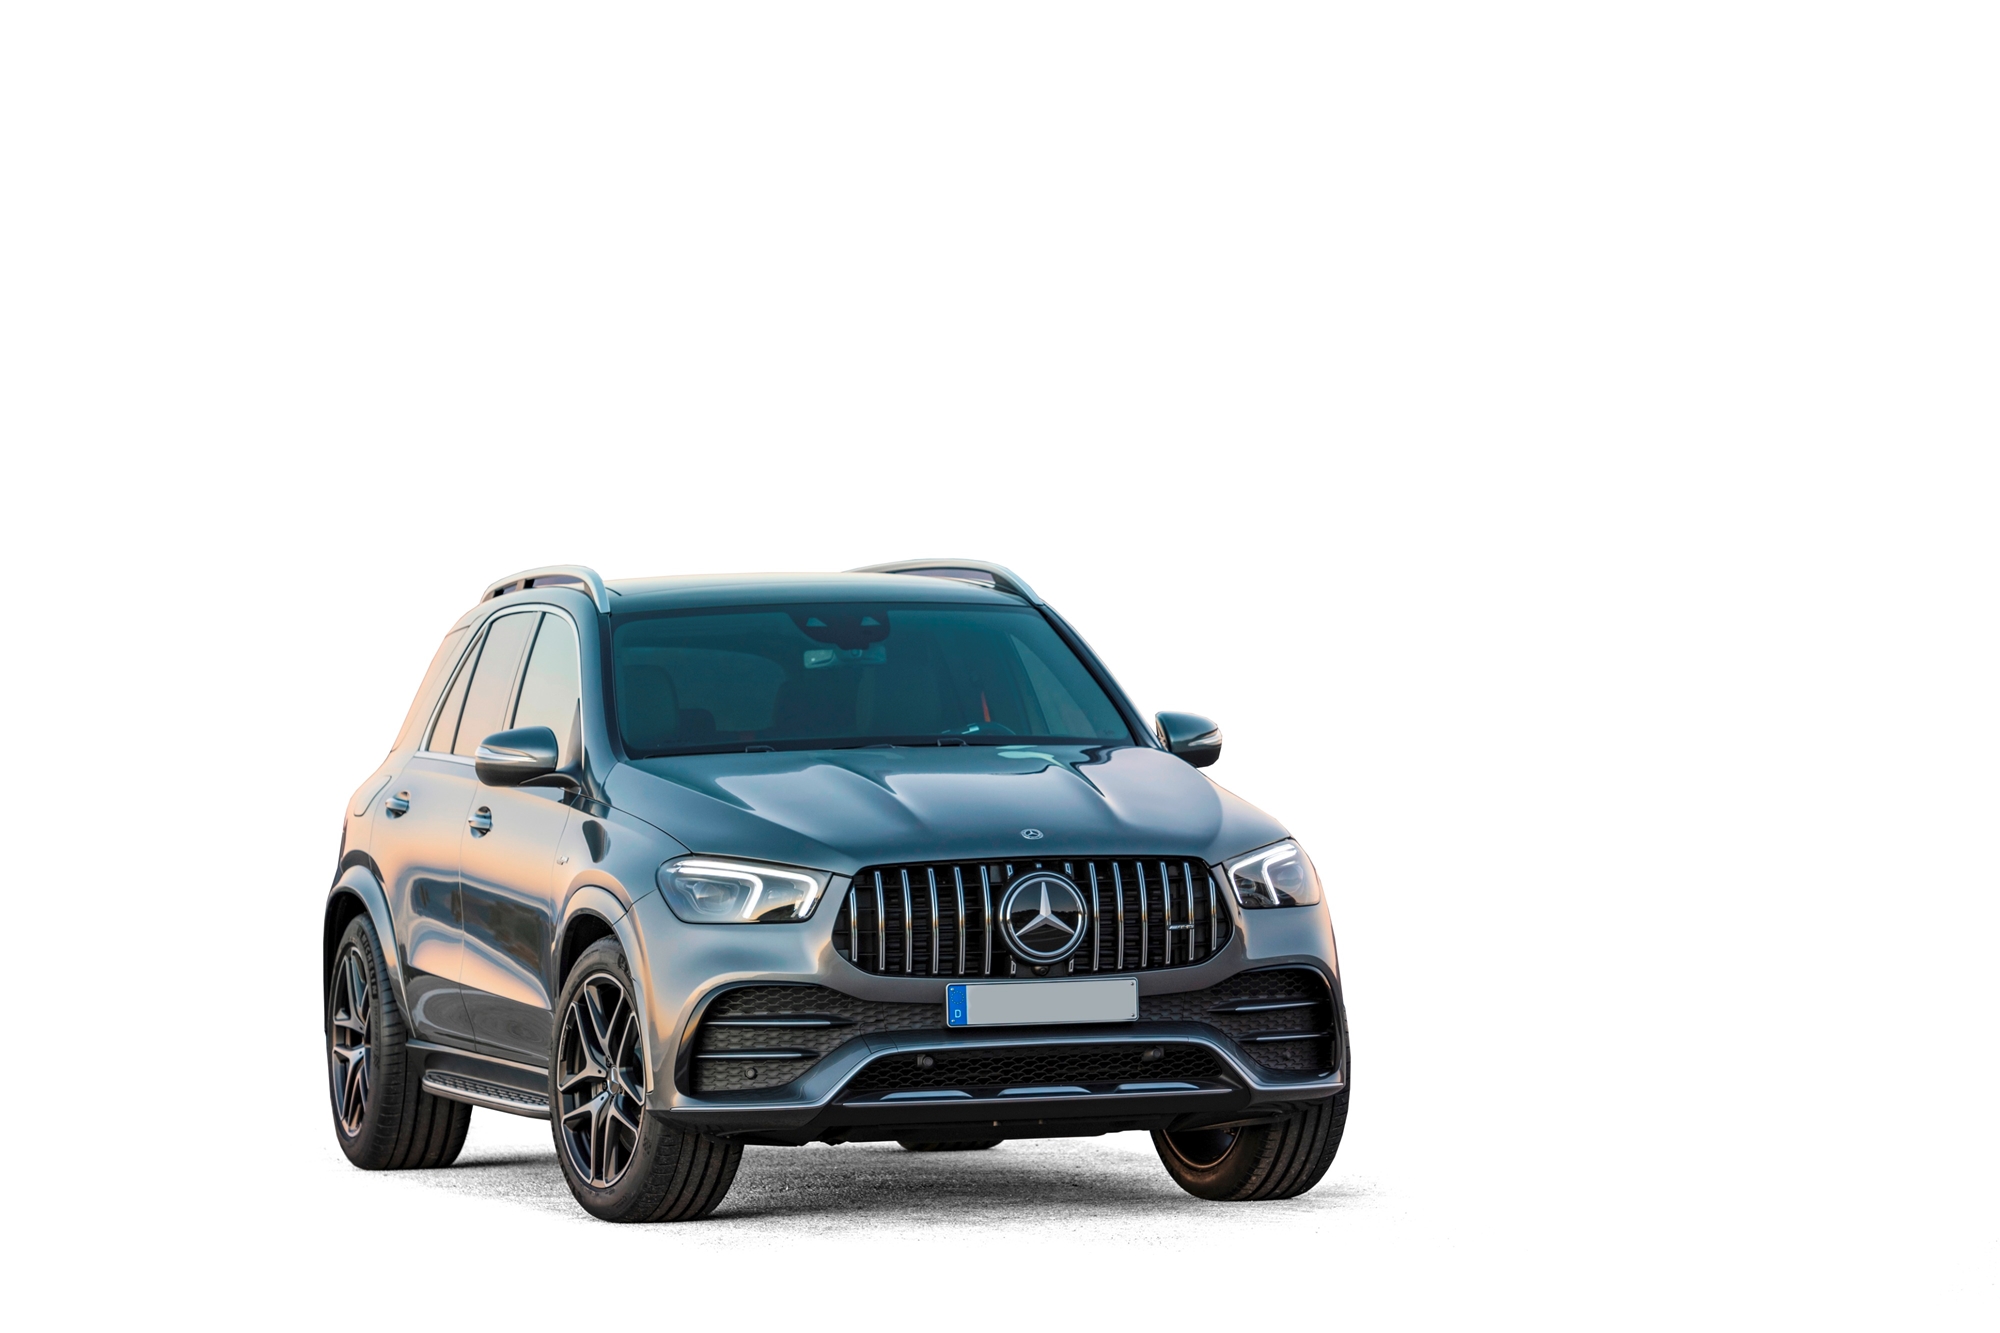 2021 Mercedes-AMG GLE 53 4MATIC SUV Full Specs, Features ...